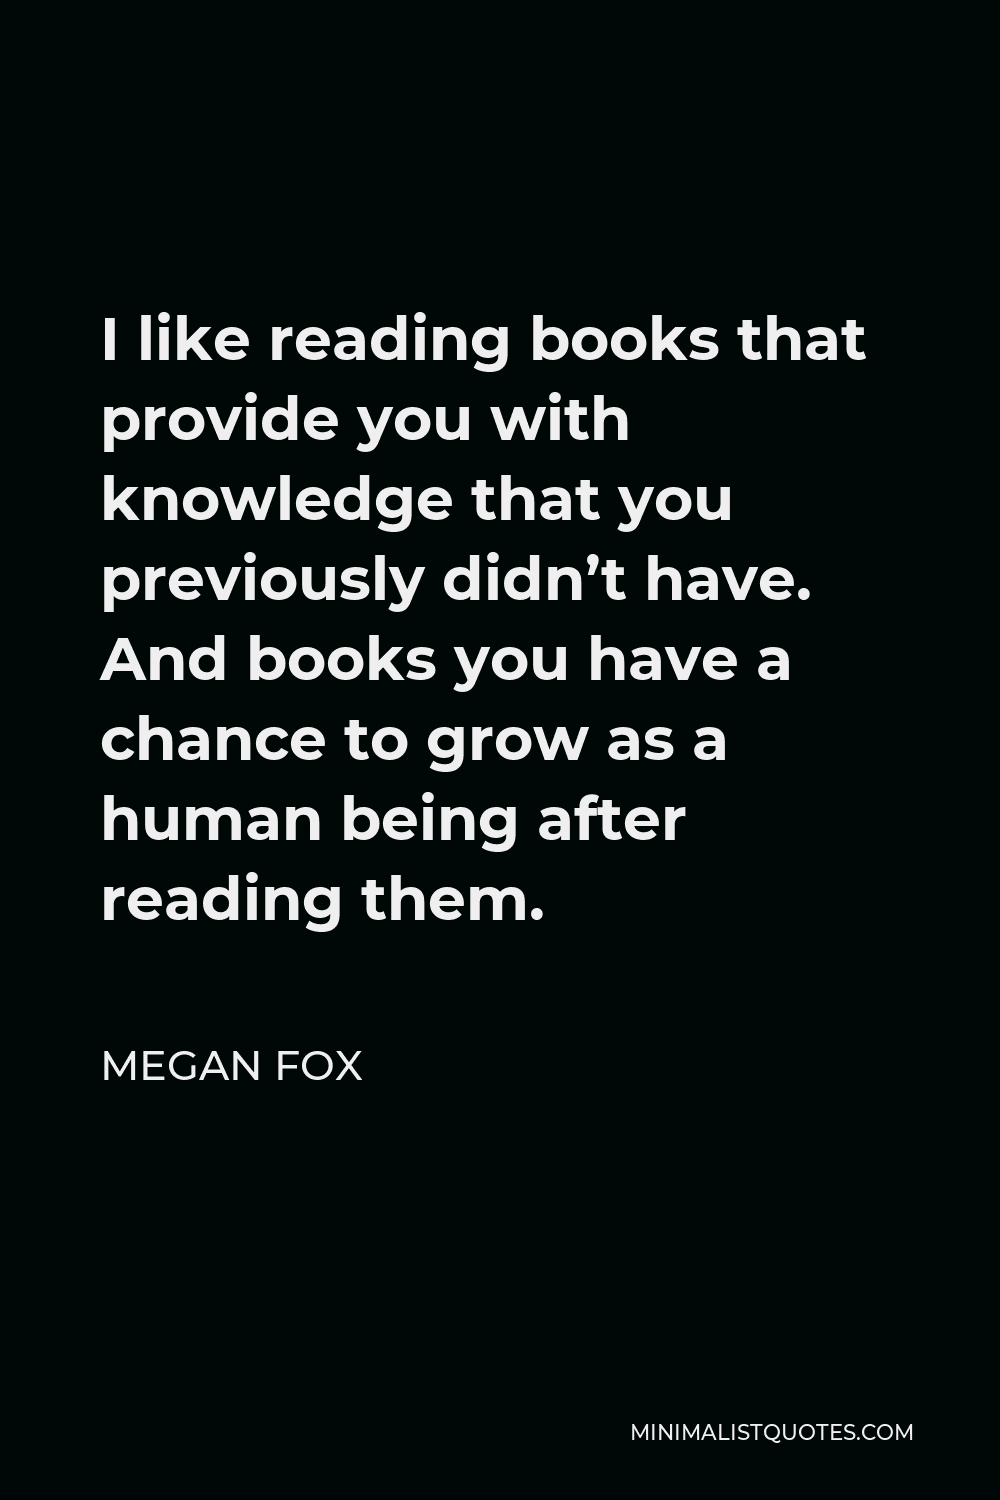 Megan Fox Quote - I like reading books that provide you with knowledge that you previously didn’t have. And books you have a chance to grow as a human being after reading them.